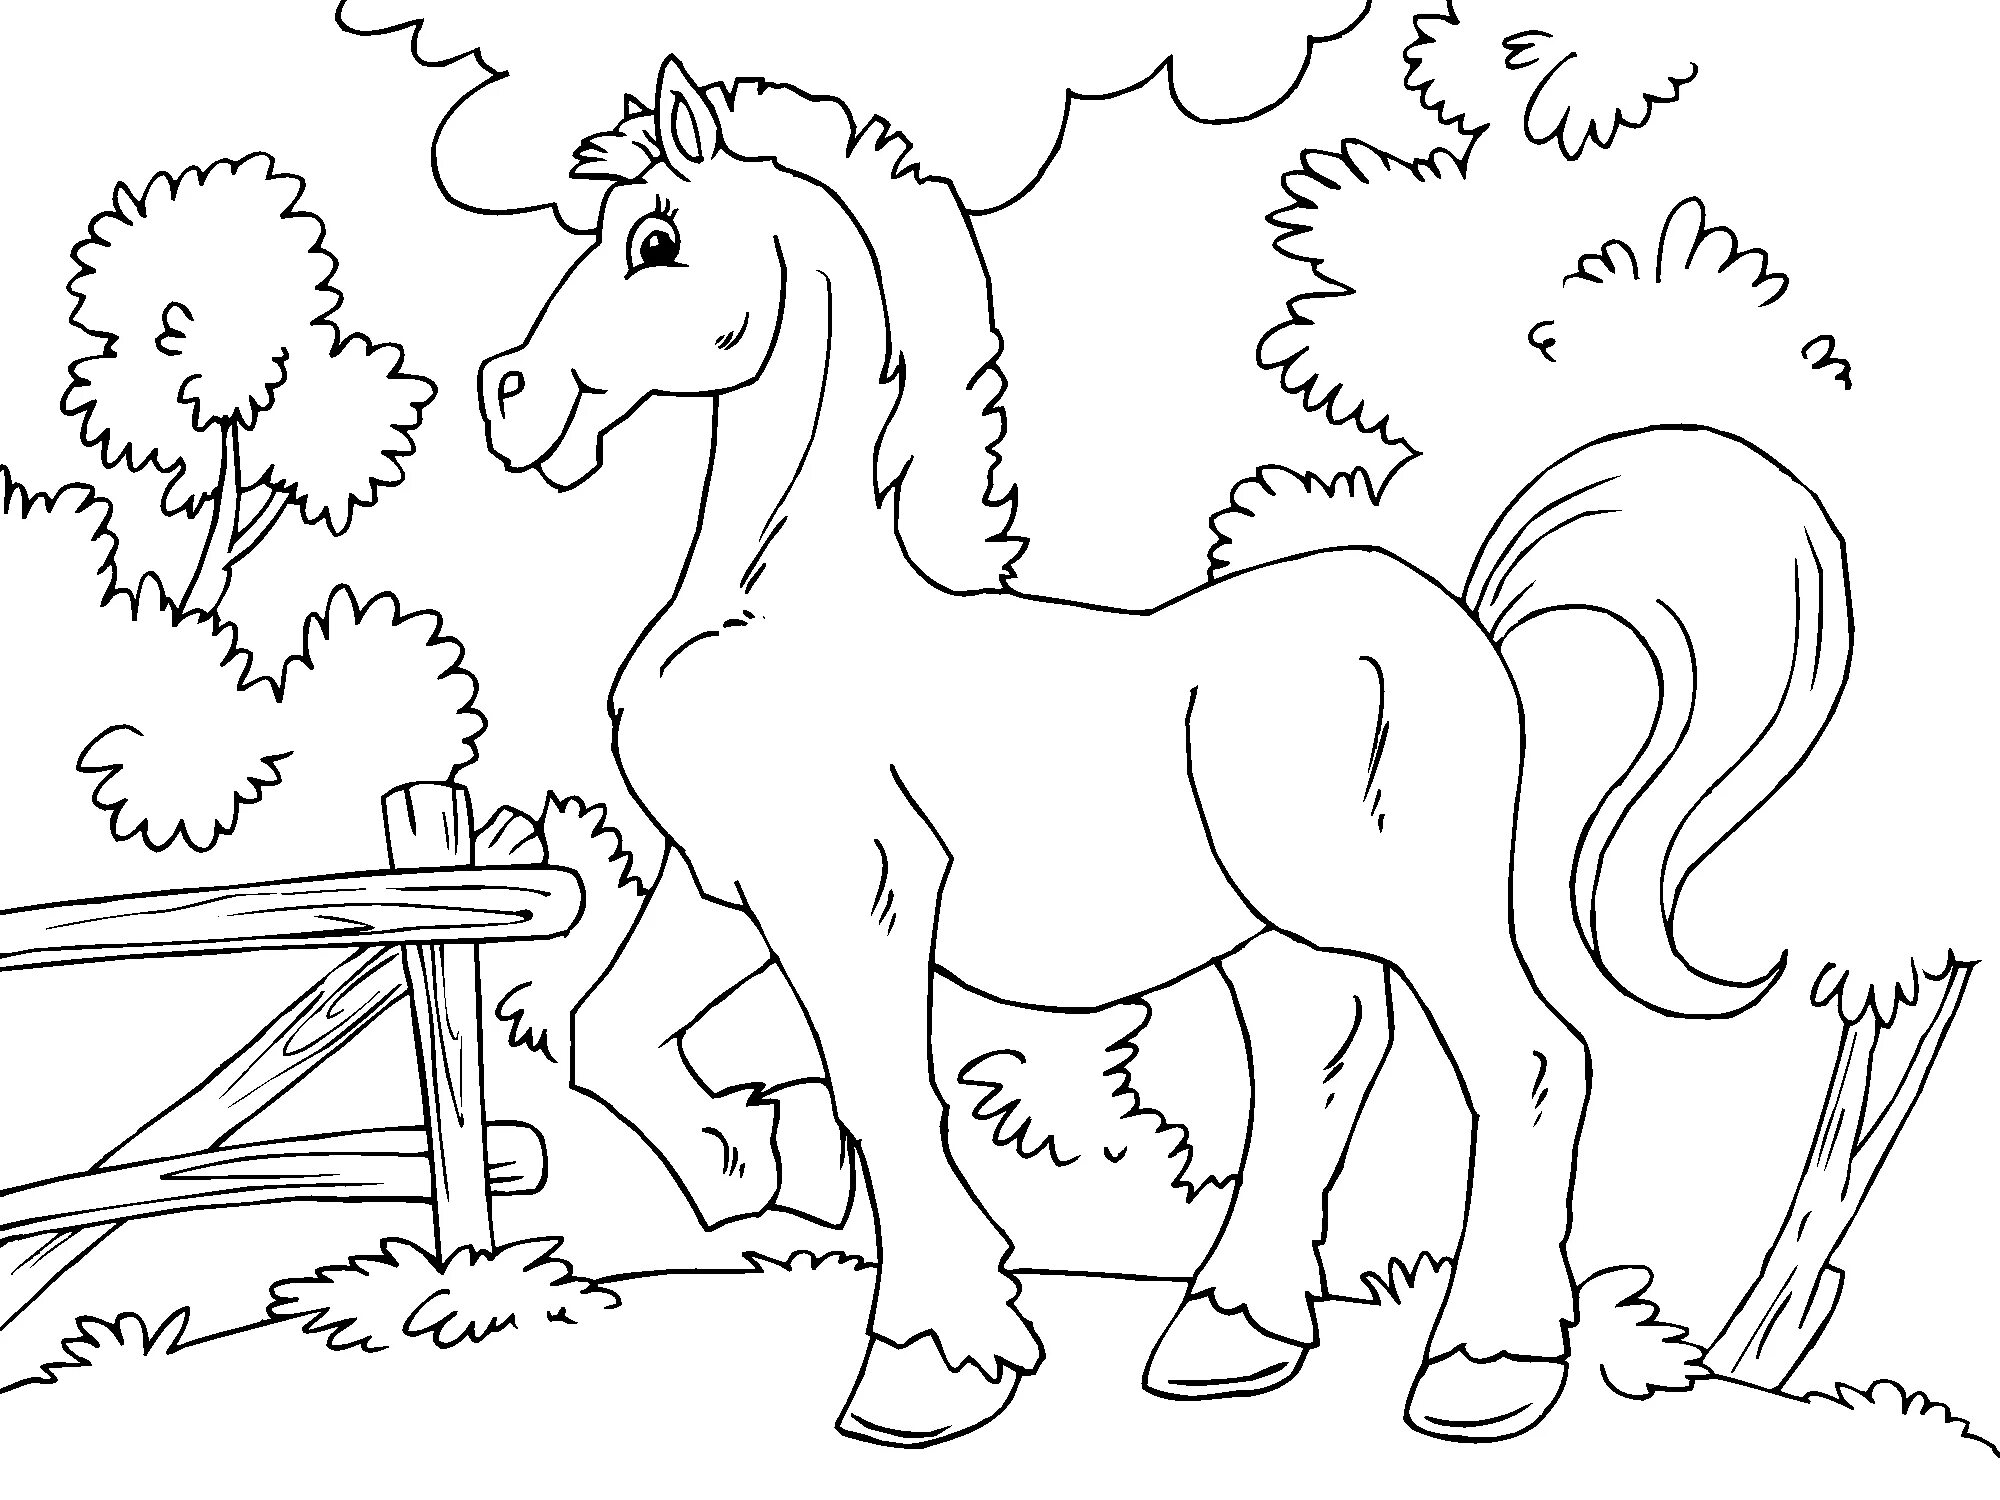 Coloring page blissful iggo